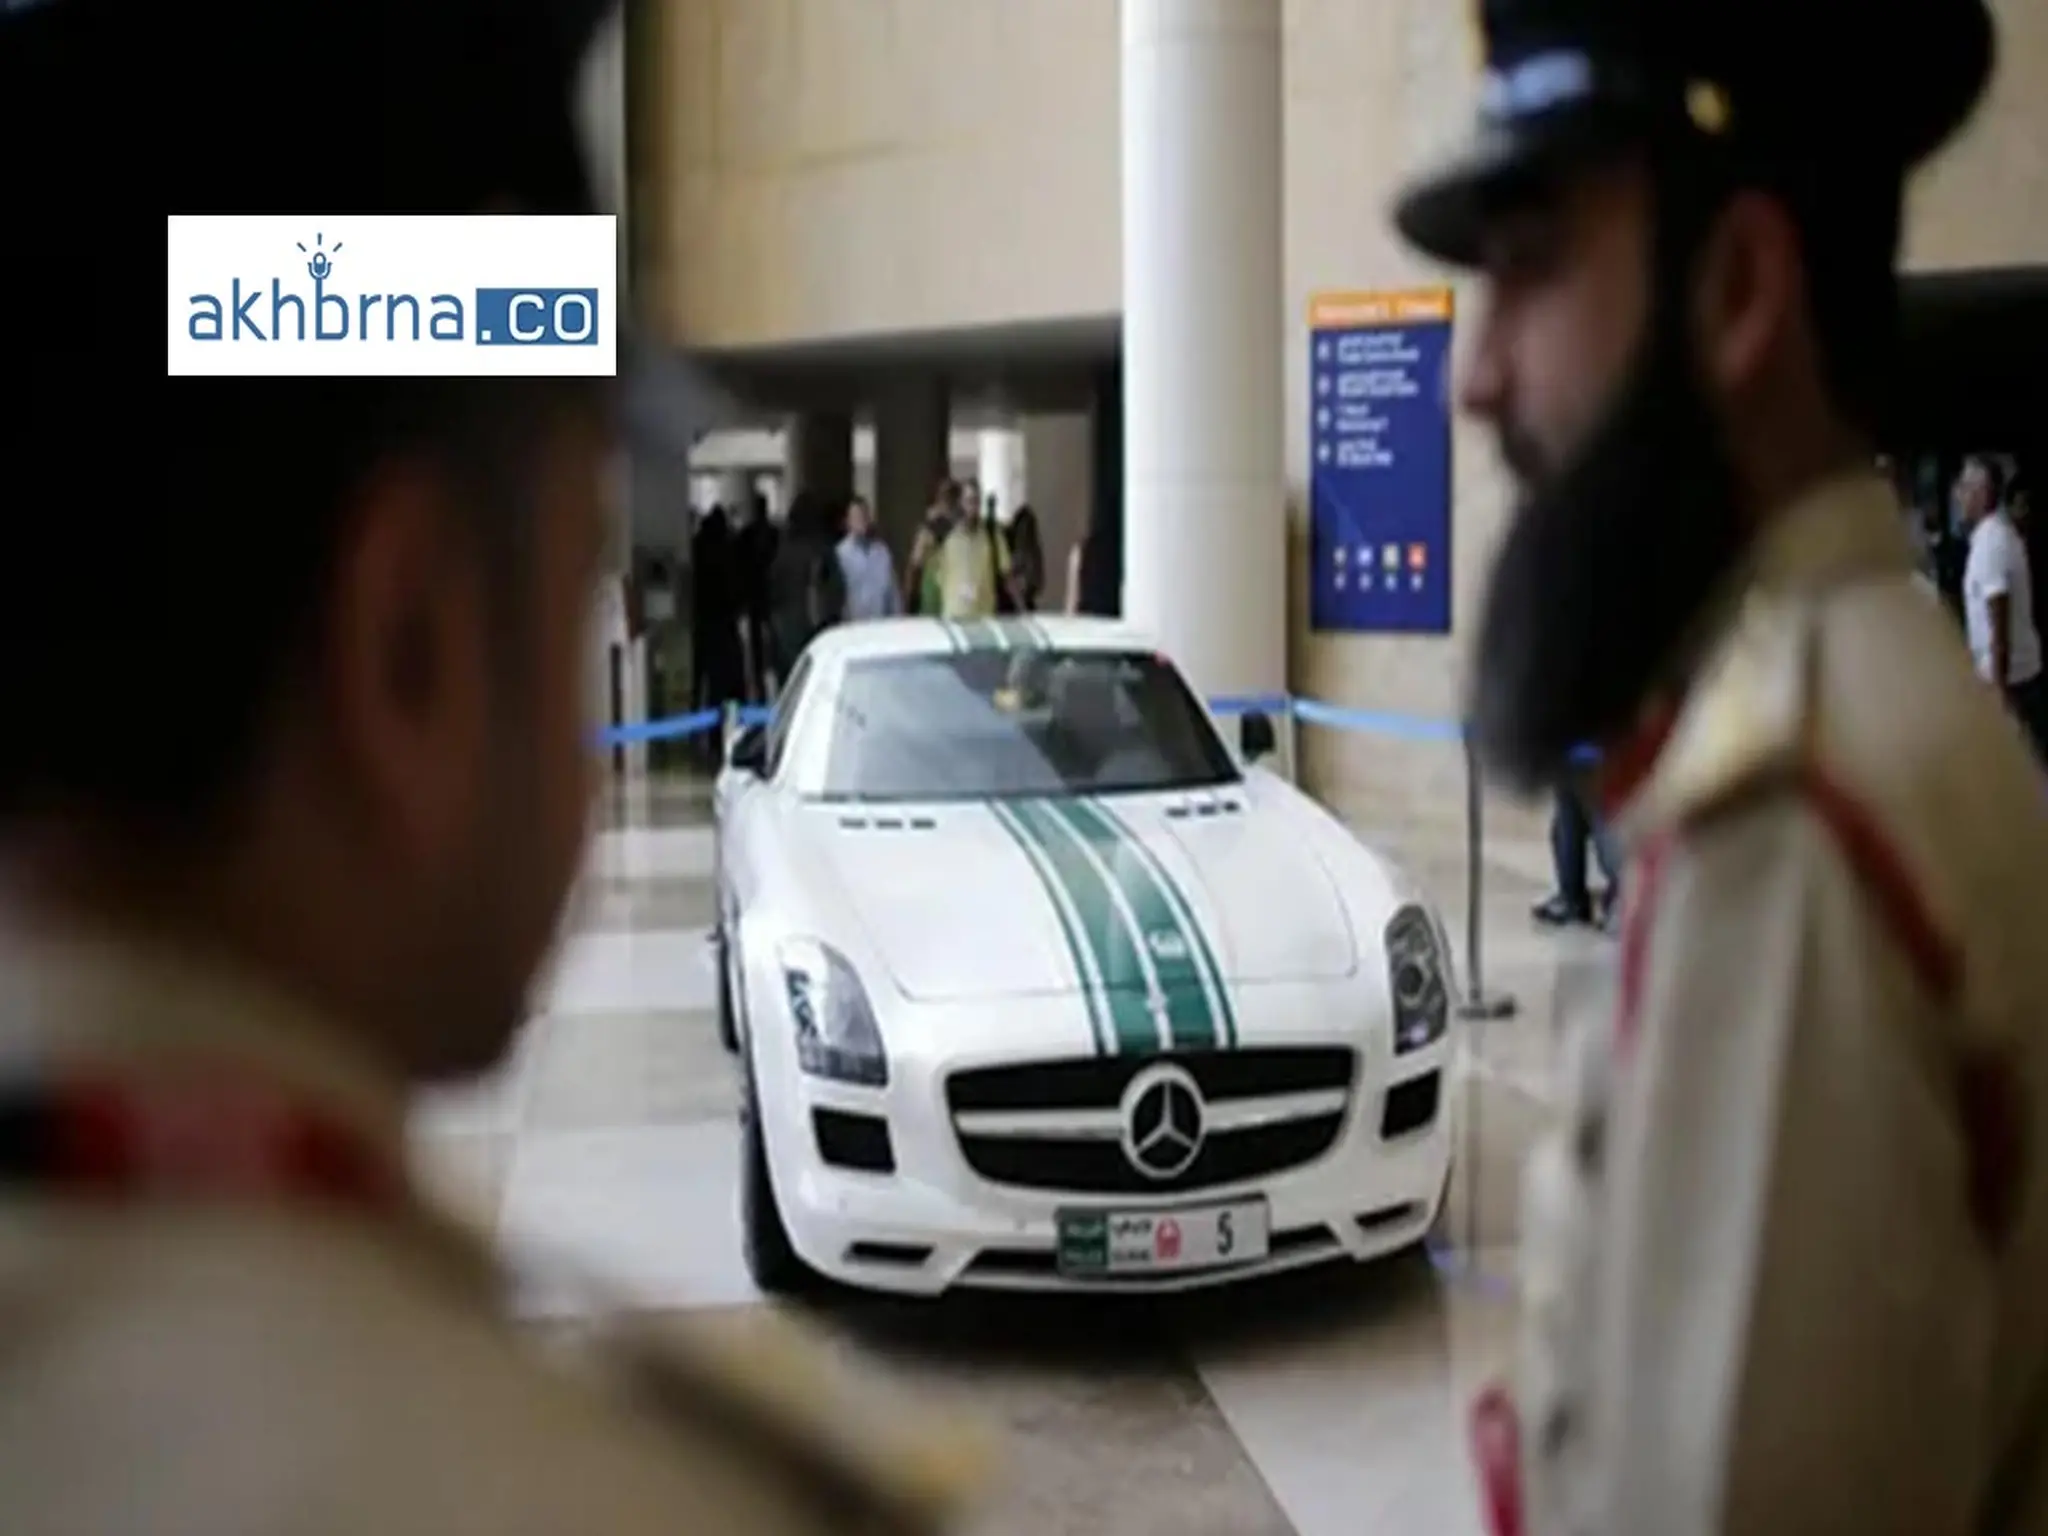 Emirates Police Warn Against Holiday Reckless Driving on Eid Al Fitr